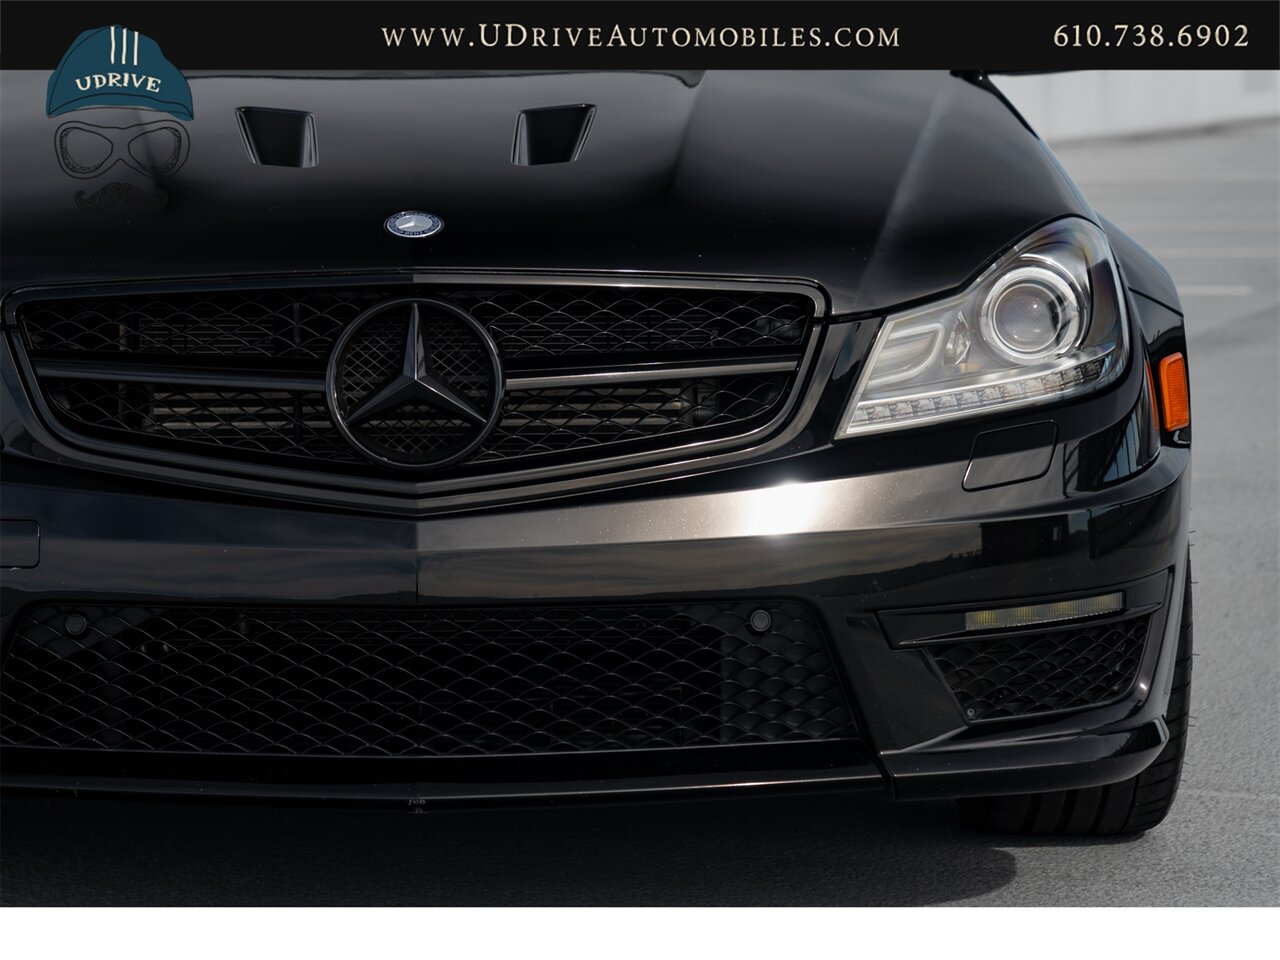 2015 Mercedes-Benz C63 AMG  Edition 507 17k Miles Pano Sunroof Locking Diff 507hp - Photo 12 - West Chester, PA 19382